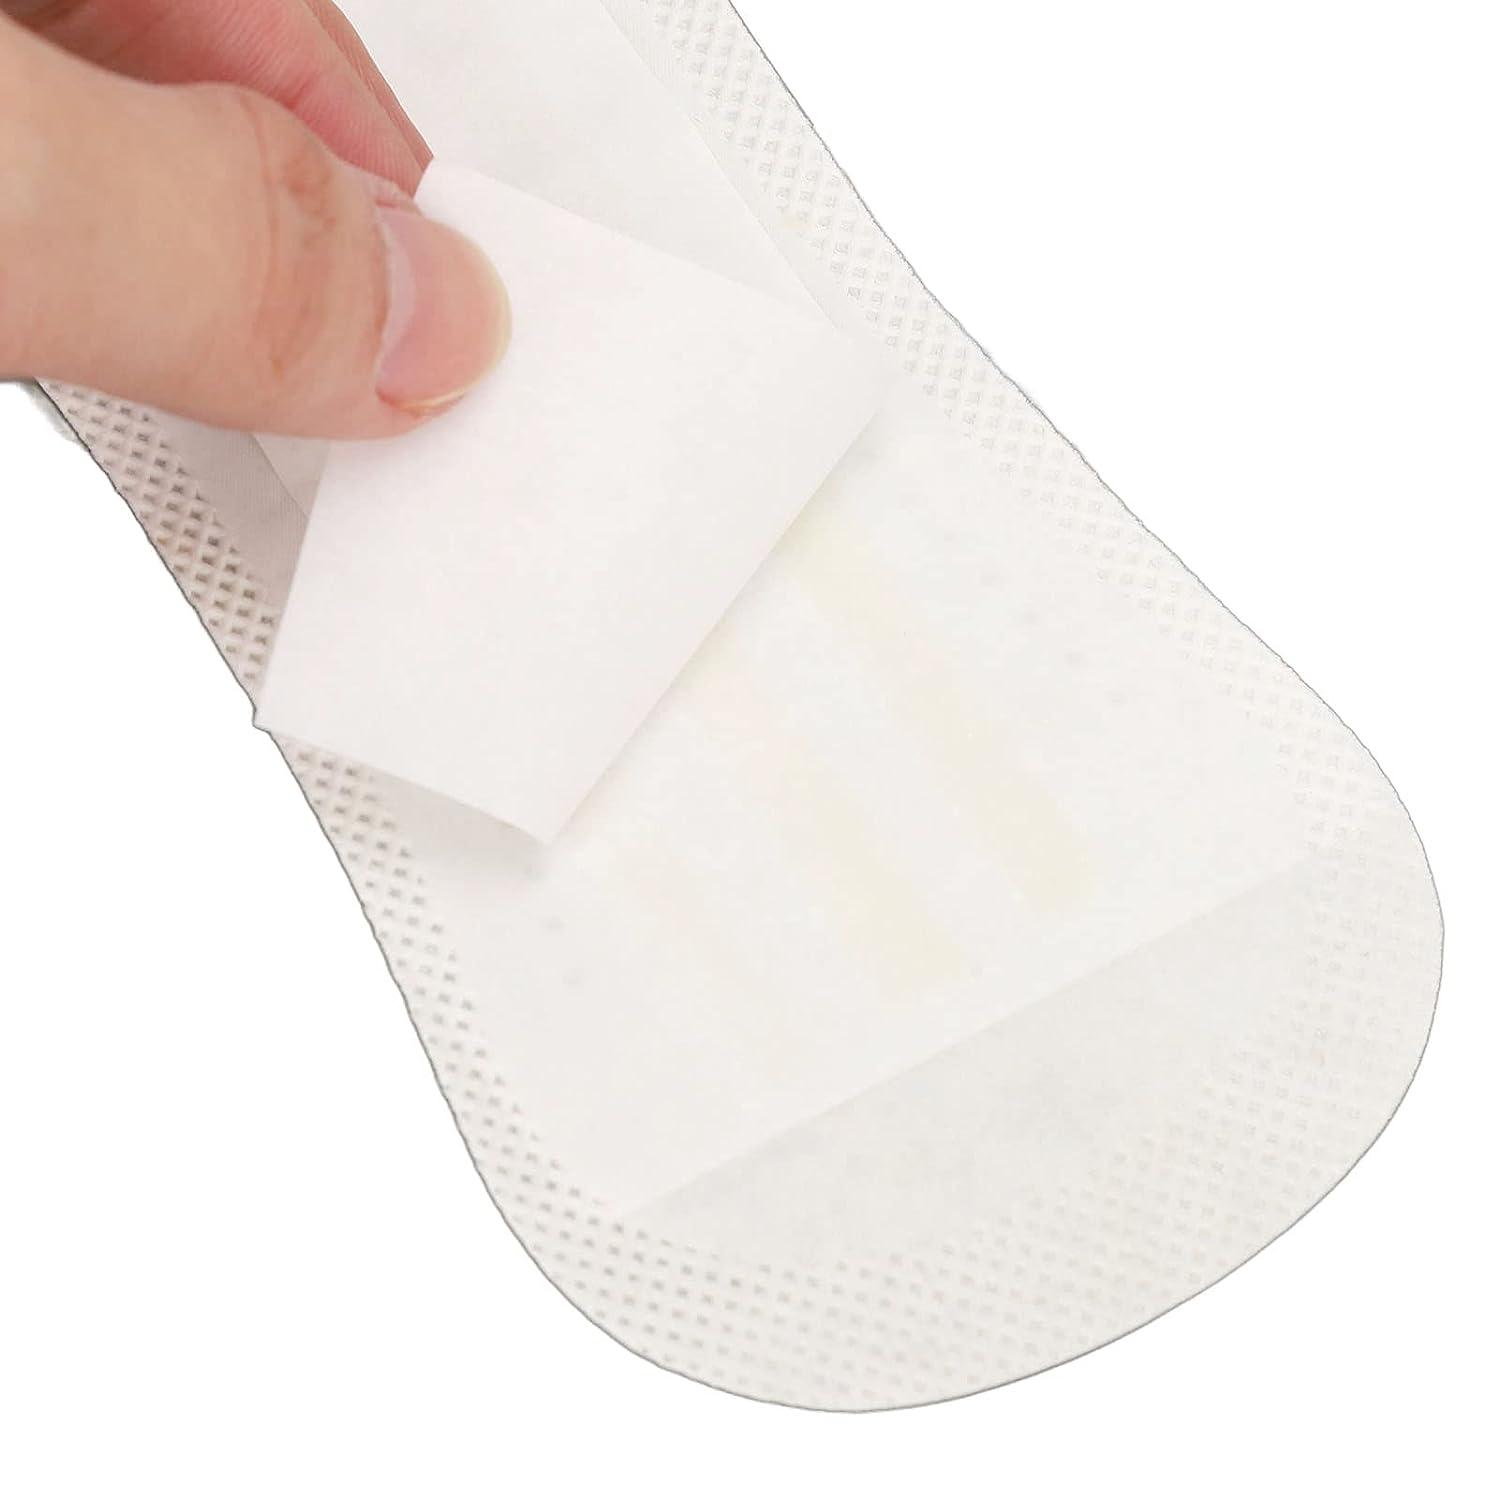 strips to test for amniotic fluid